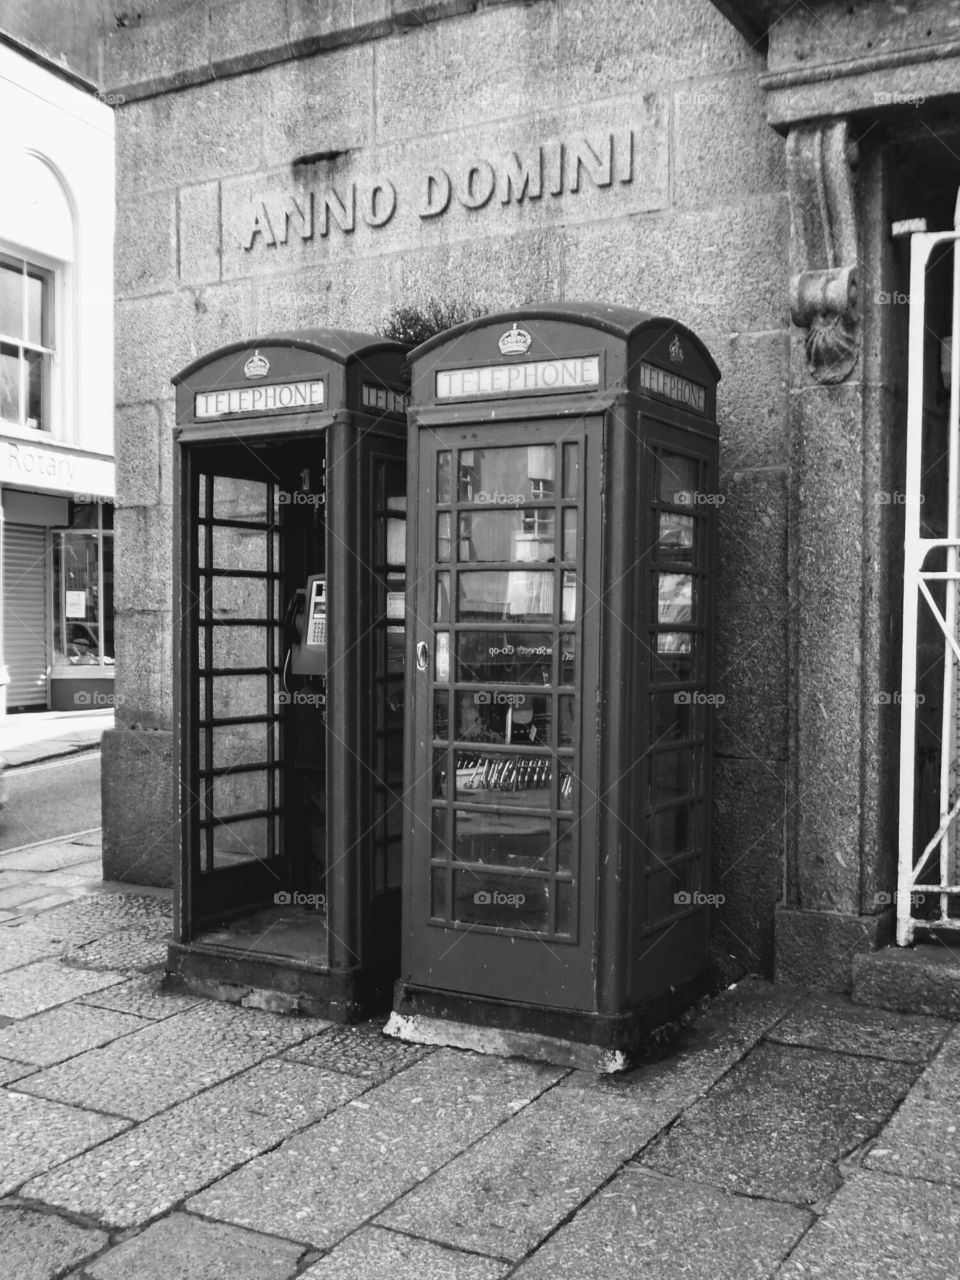 Penzance Cornwall UK type 2 phone boxes wooden and cast iron doors one missing